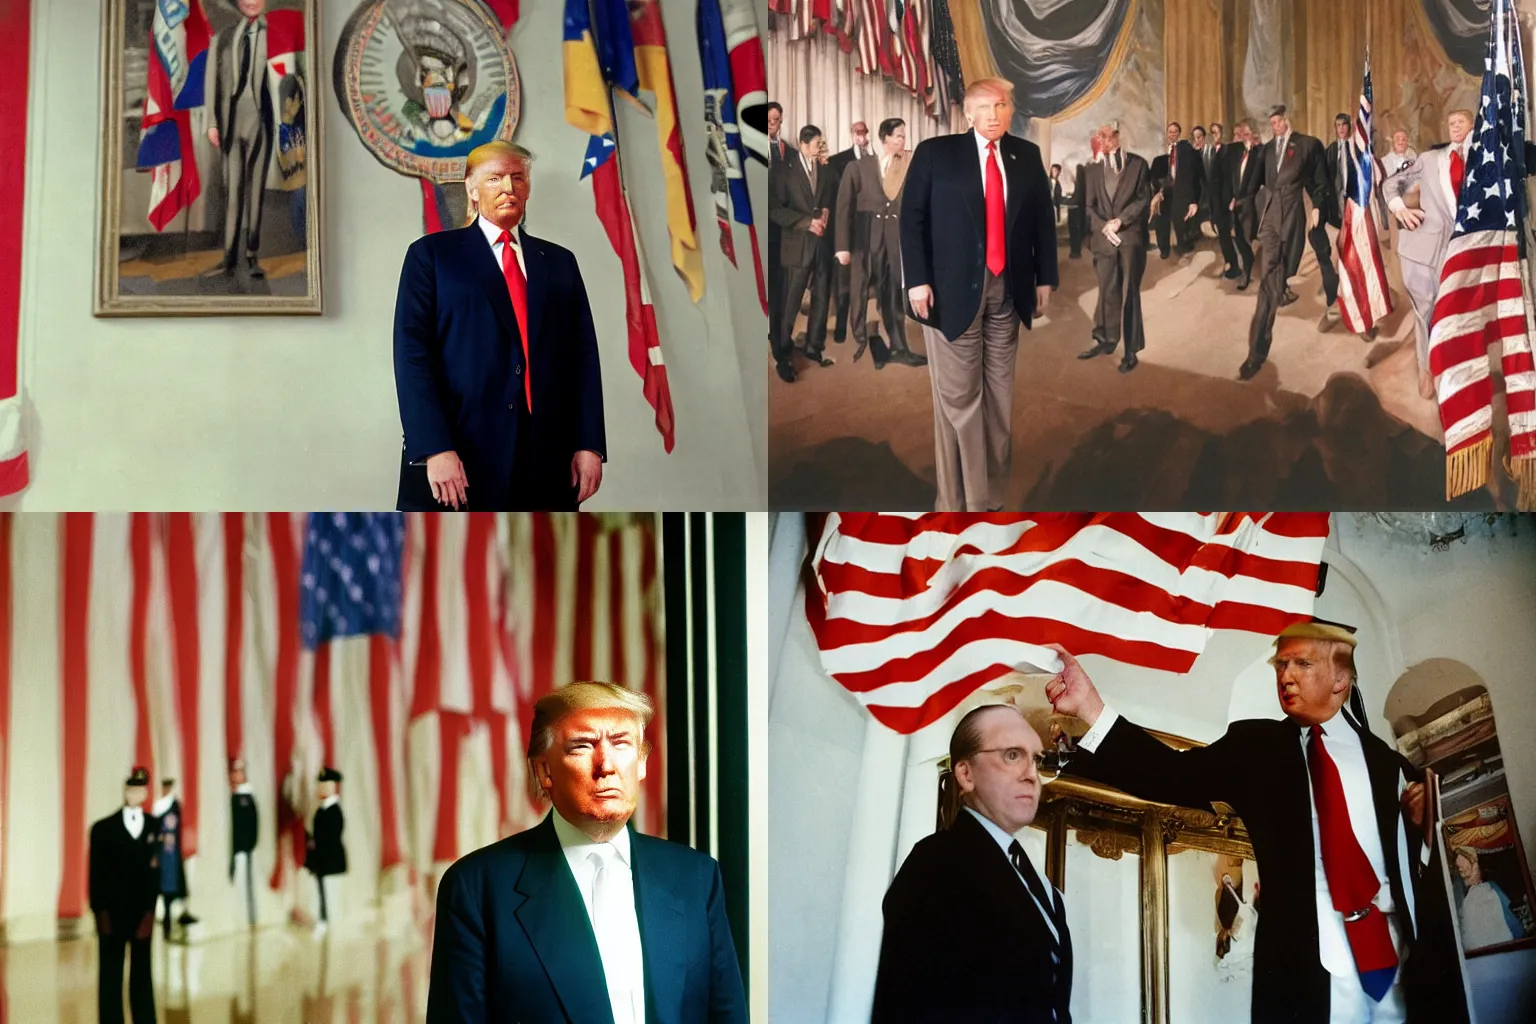 Prompt: color portrait photograph close up of Donald Trump wearing suit designed by Karl Diebitsch inside a large room designed by architect Marcello Piacentini, in the background large american flag banners and men standing wearing Schutzstaffel clothing, off-camera flash, canon 24mm f11 aperture, Ektachrome color photograph